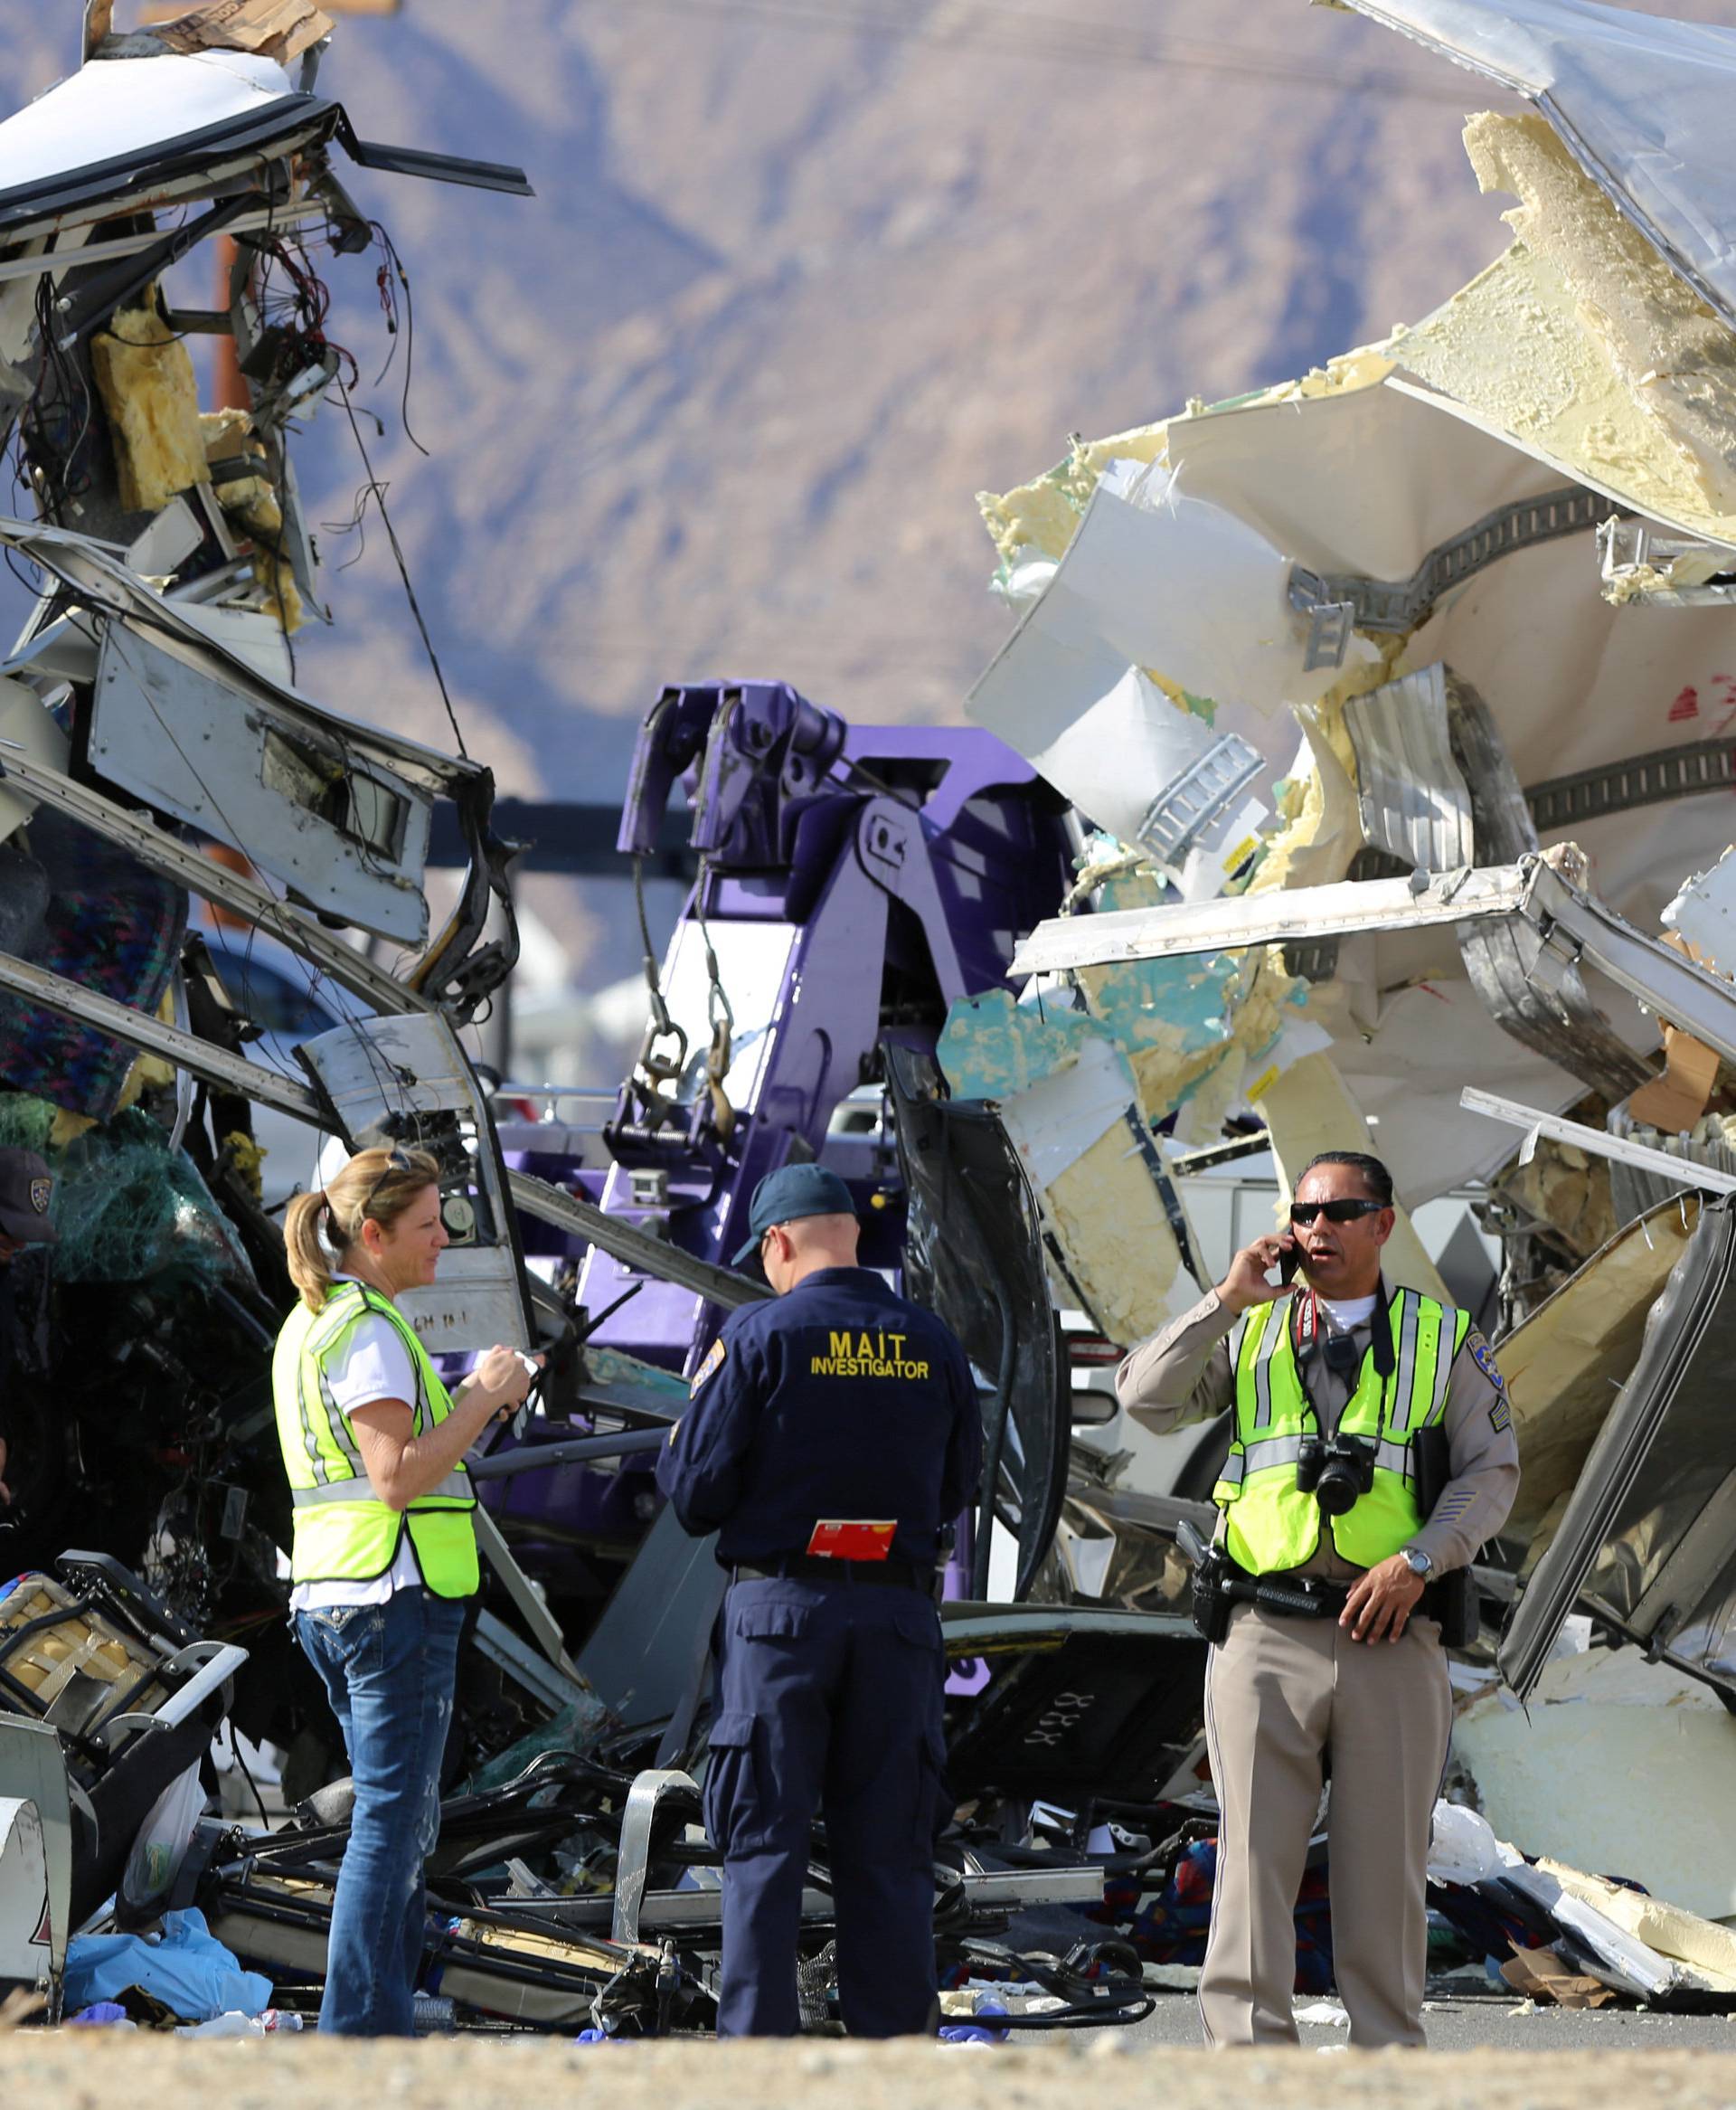 Investigators speak to each other at the scene of a mass casualty bus crash on the westbound Interstate 10 freeway near Palm Springs